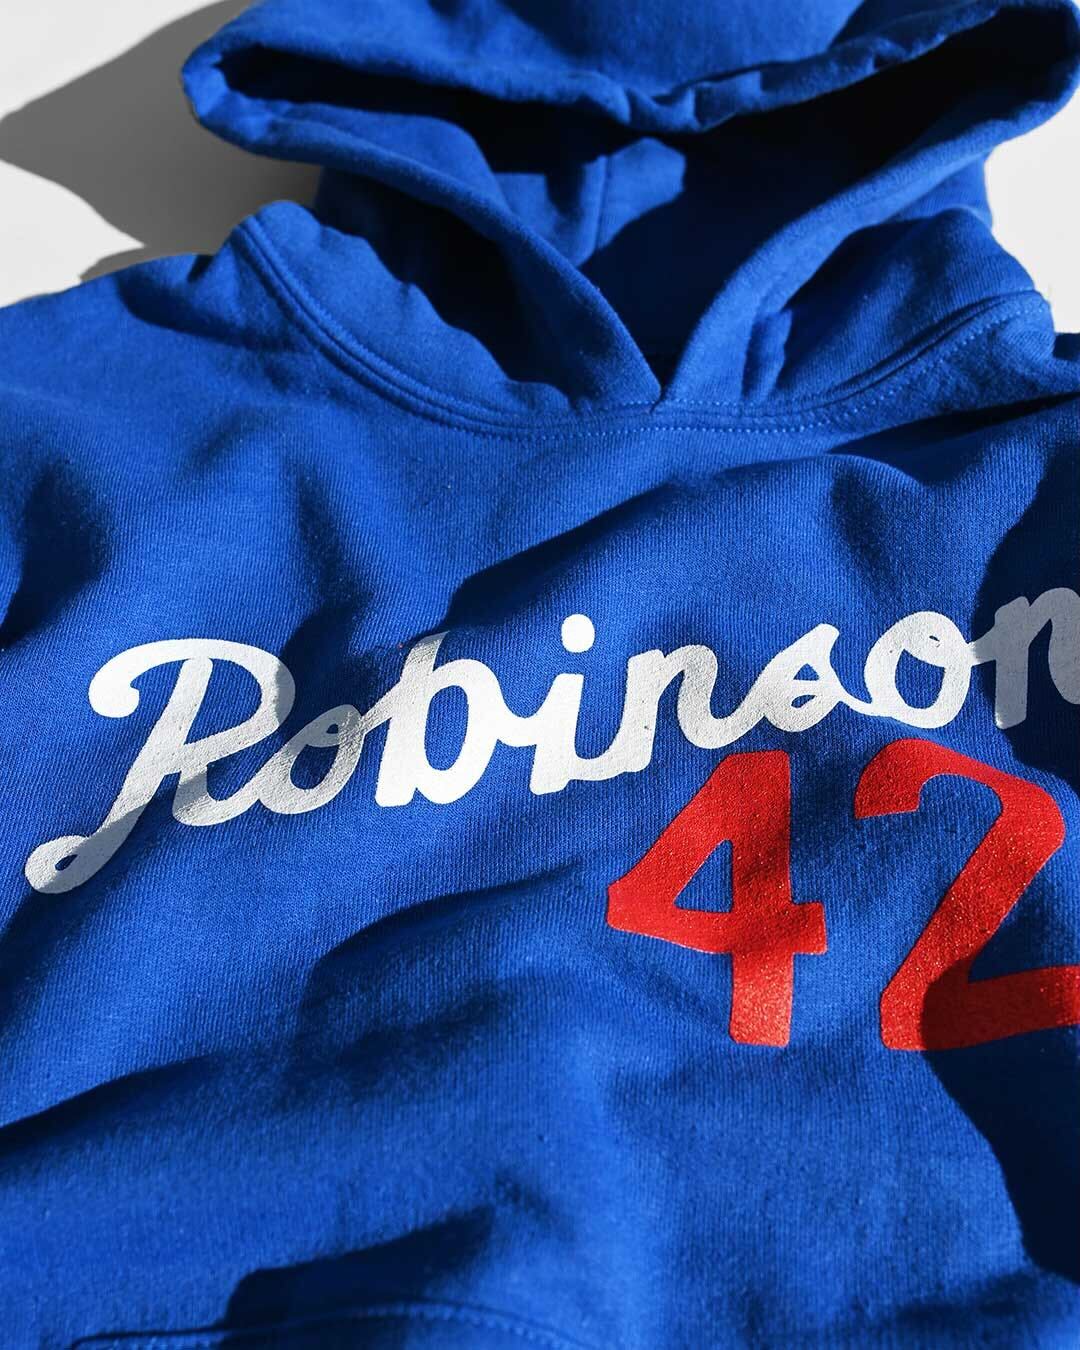 Jackie Robinson #42 Blue Kid's Hoody - Roots of Fight